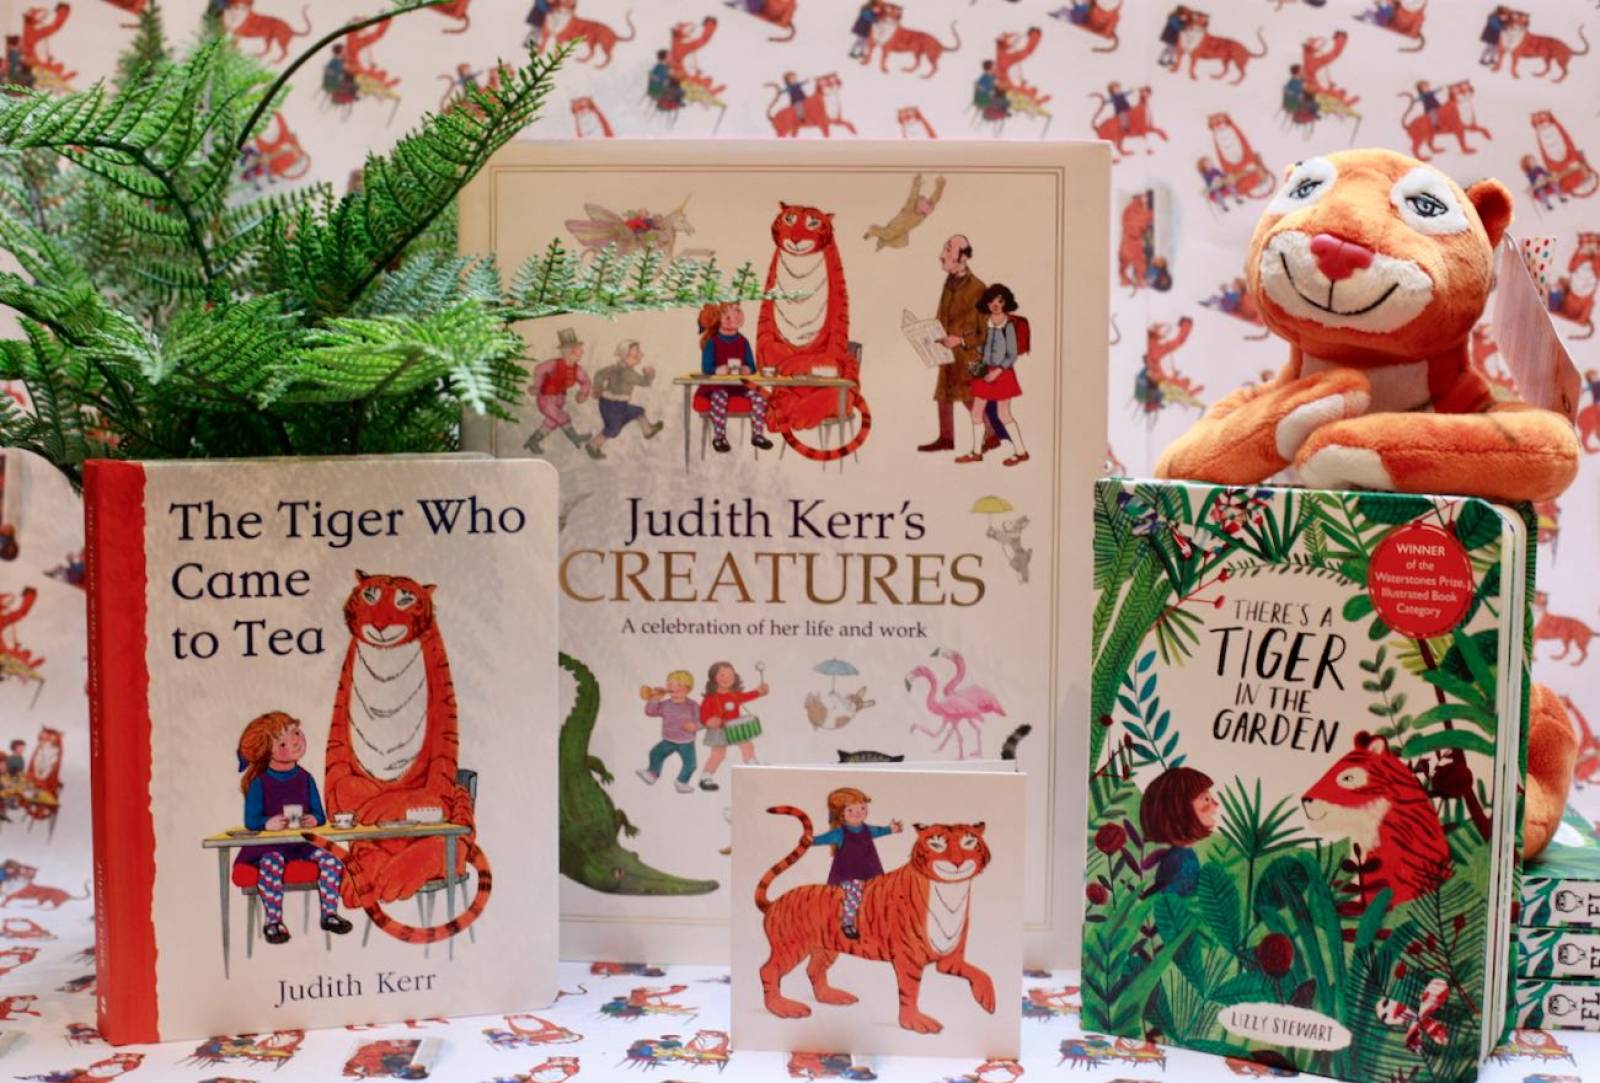 There's A Tiger In The Garden - Board Book thumbnails